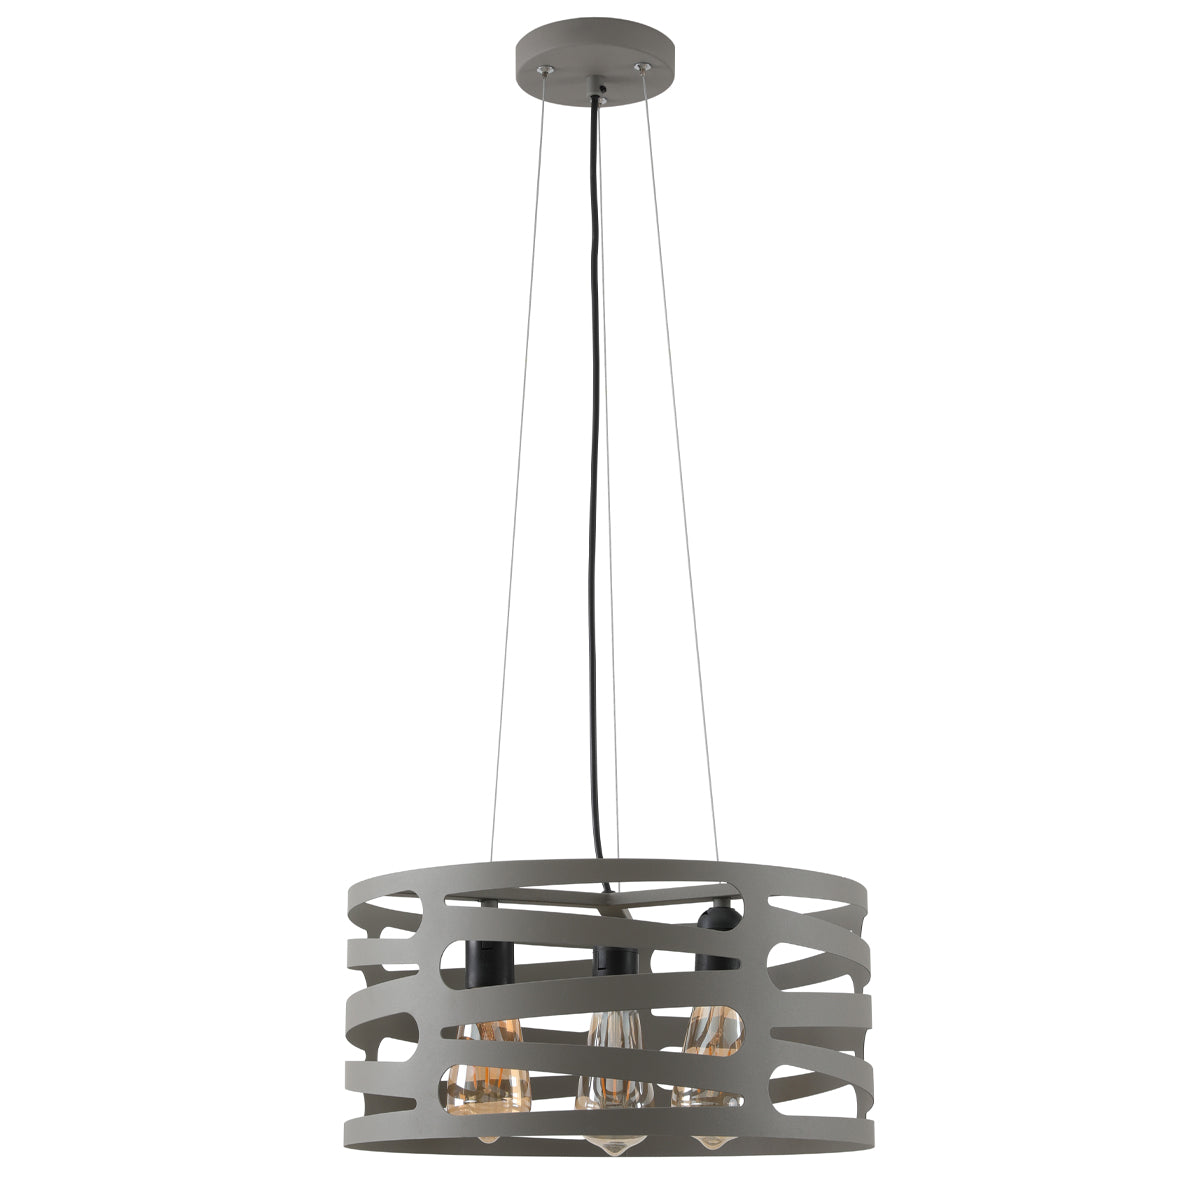 Our Marissa pendant ceiling Light is a strikingly beautiful fitting modern and contemporary in its appearance. This pendant light is constructed from a metal circular shade with laser cut outs and comes complete with a black adjustable cord and matching ceiling rose. When lit this light creates something spectacular as the light shines through the cut out shapes. 